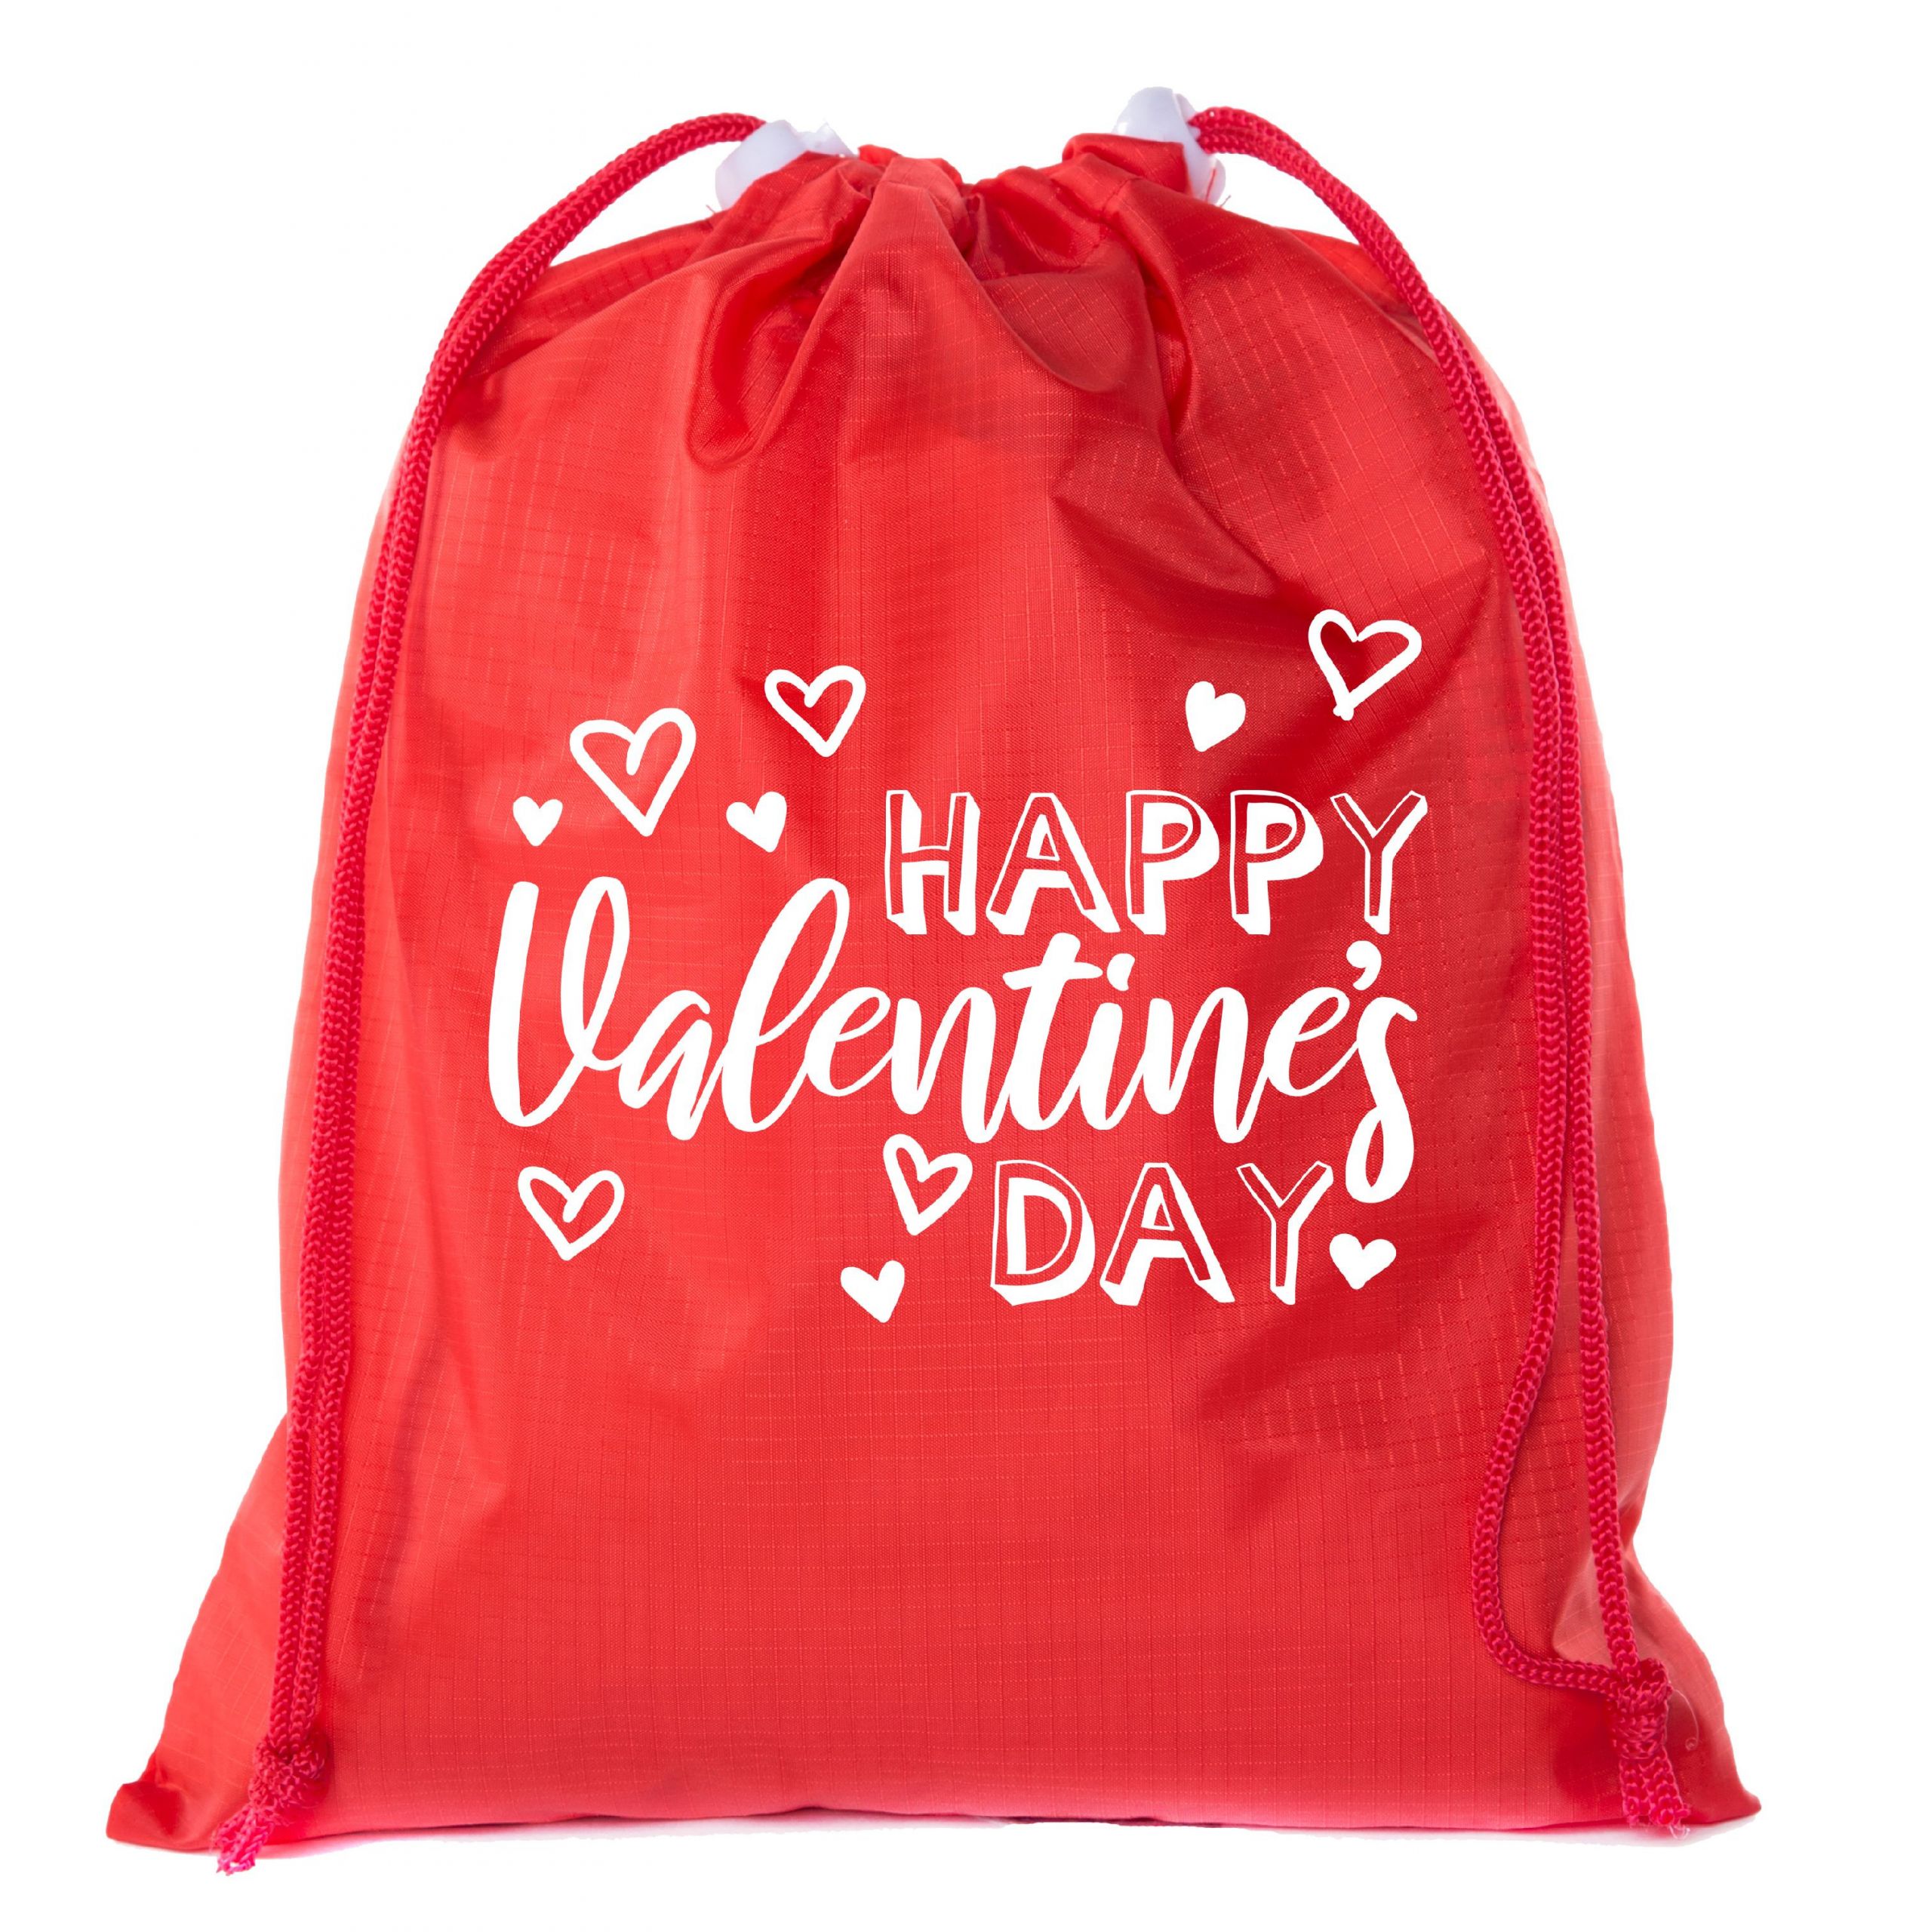 Valentines Day Gift Bags
 Mato & Hash Valentine s Day Bags Mini Drawstring Cinch